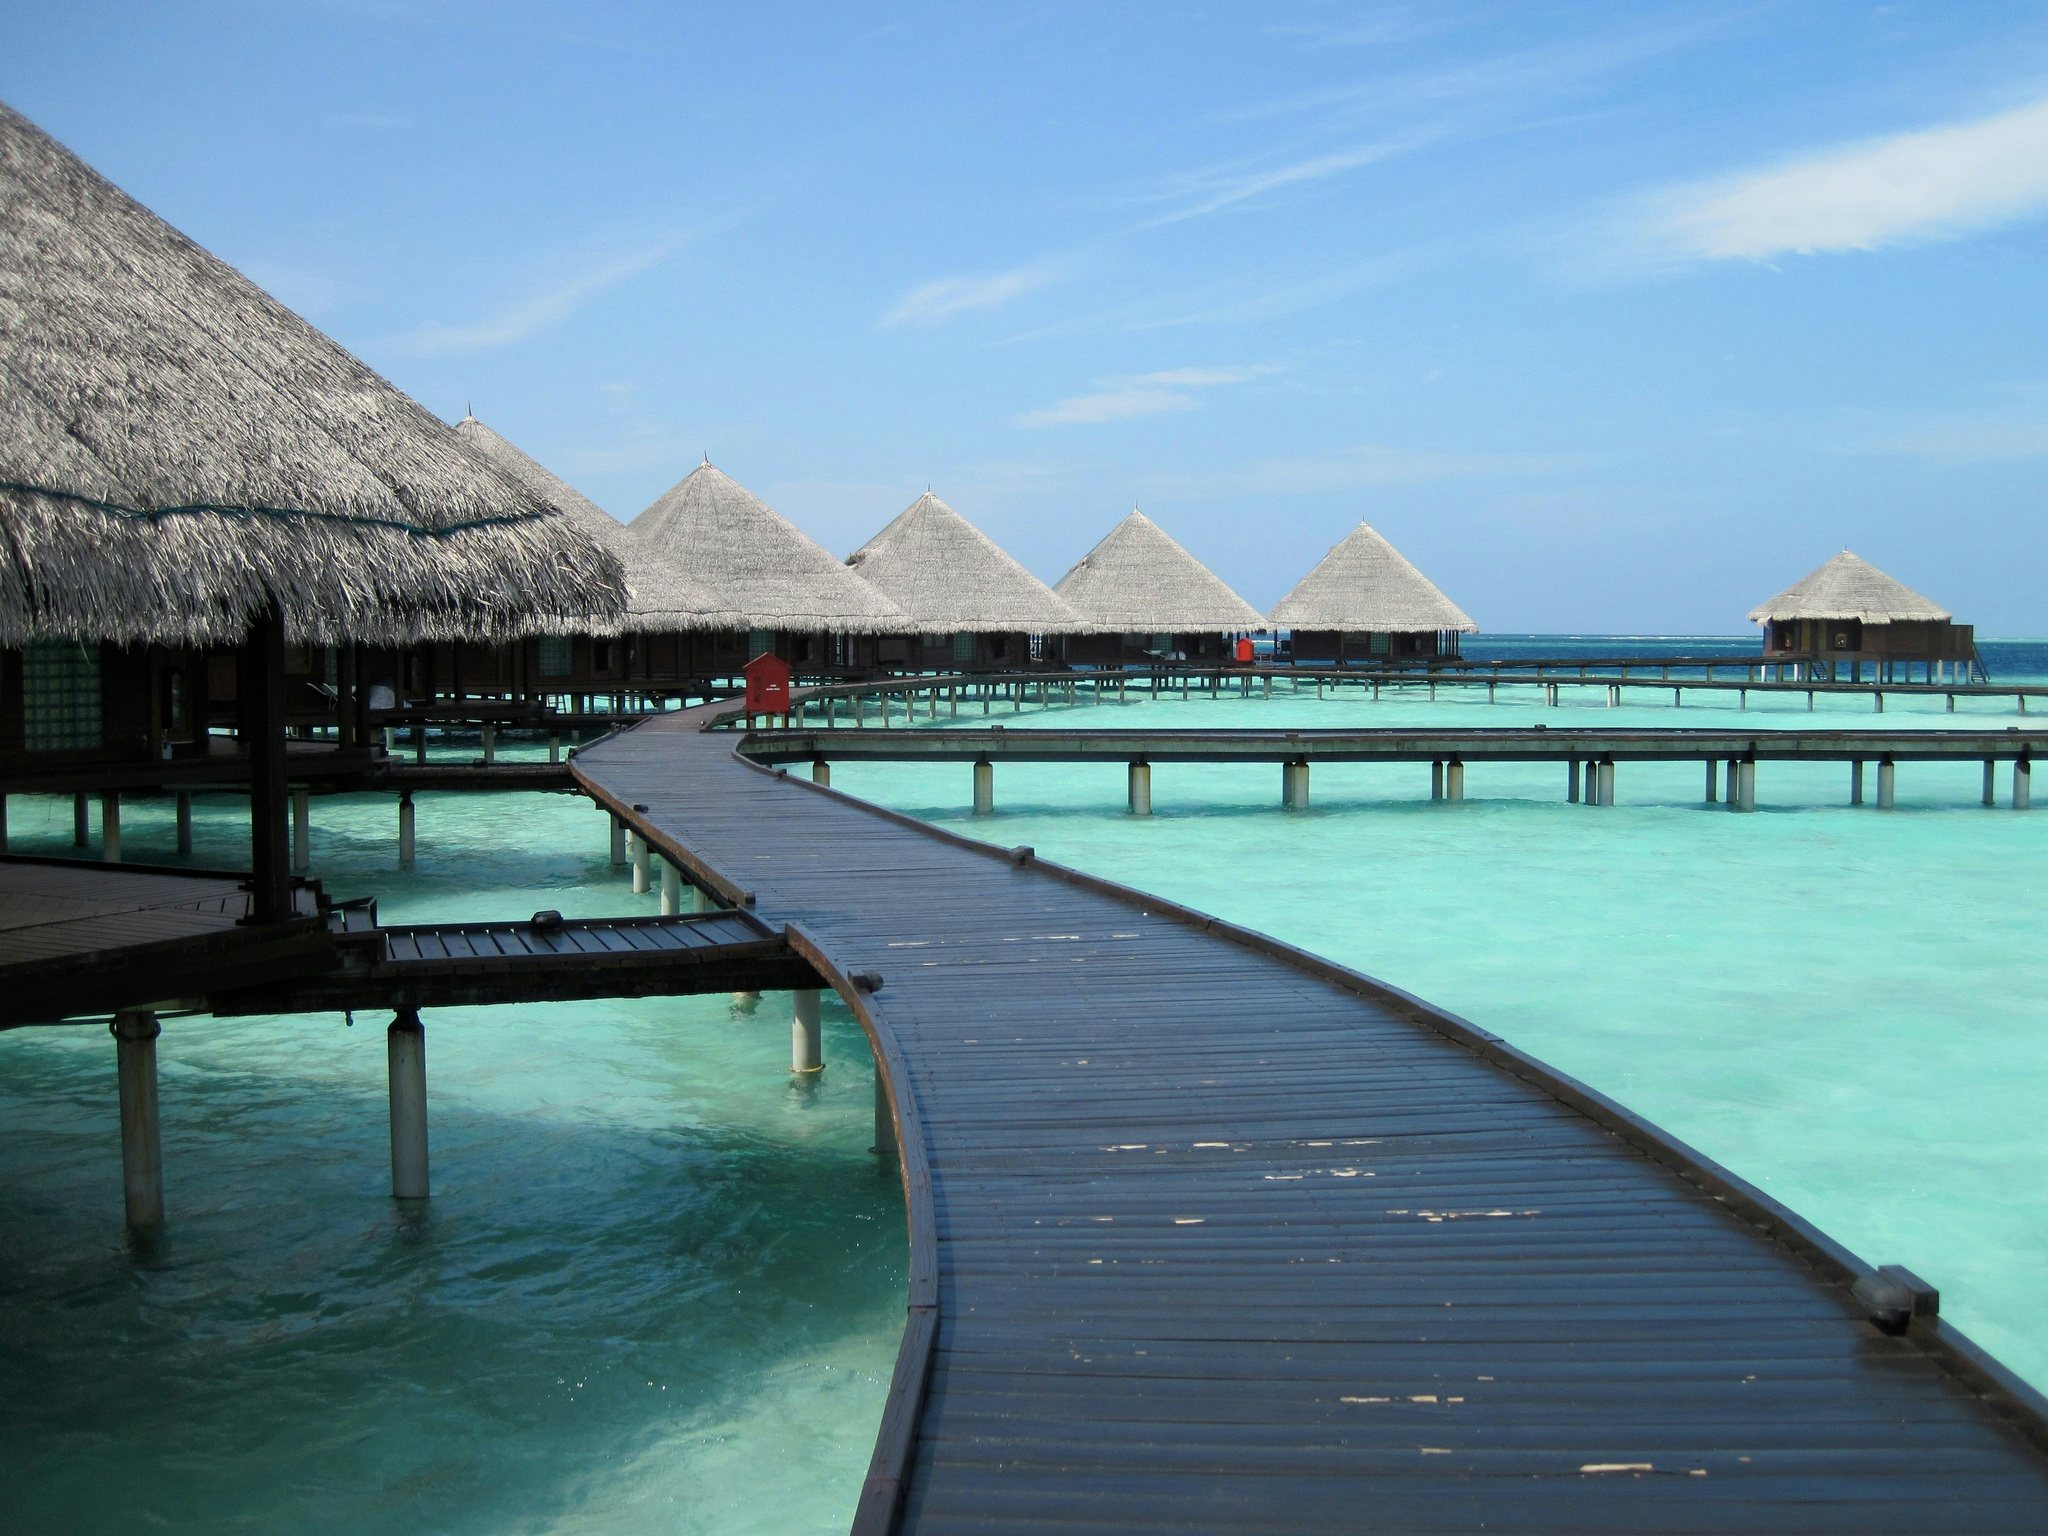 The Maldives came out on top when Agility Research and Strategy asked Chinese millennial travelers where they were headed in the next year. (Selda Eigler/<a href="https://www.flickr.com/photos/selda_eigler/8687784327/">Flickr</a>)